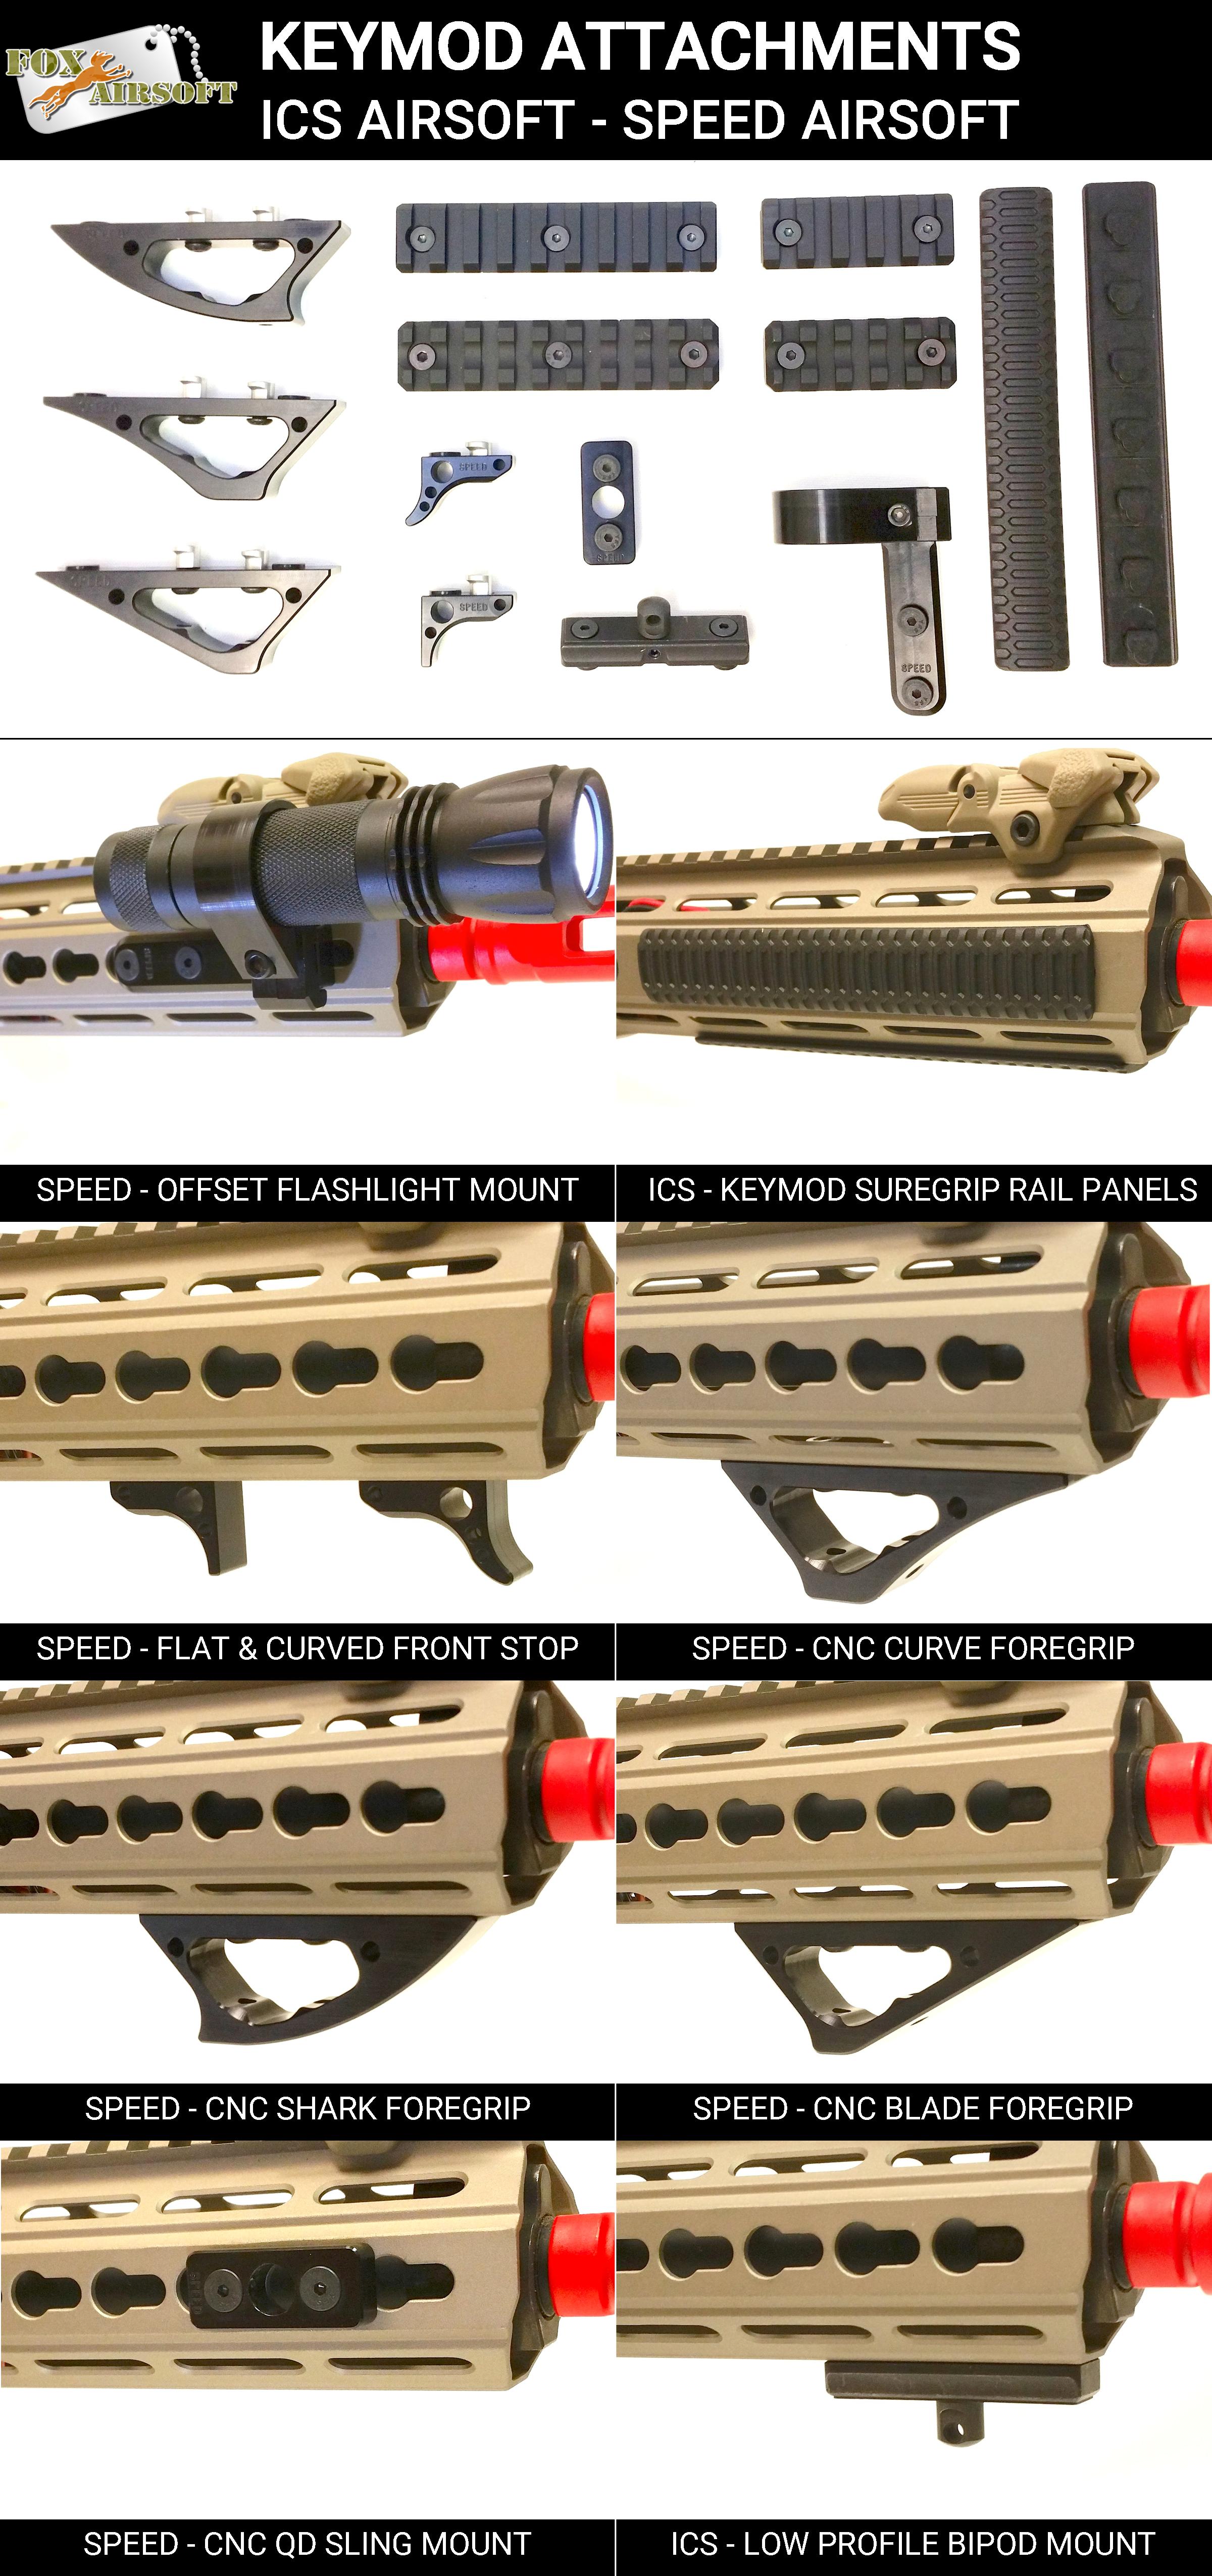 Accessories - Speed Airsoft & - Airsoft Review - Fox Airsoft